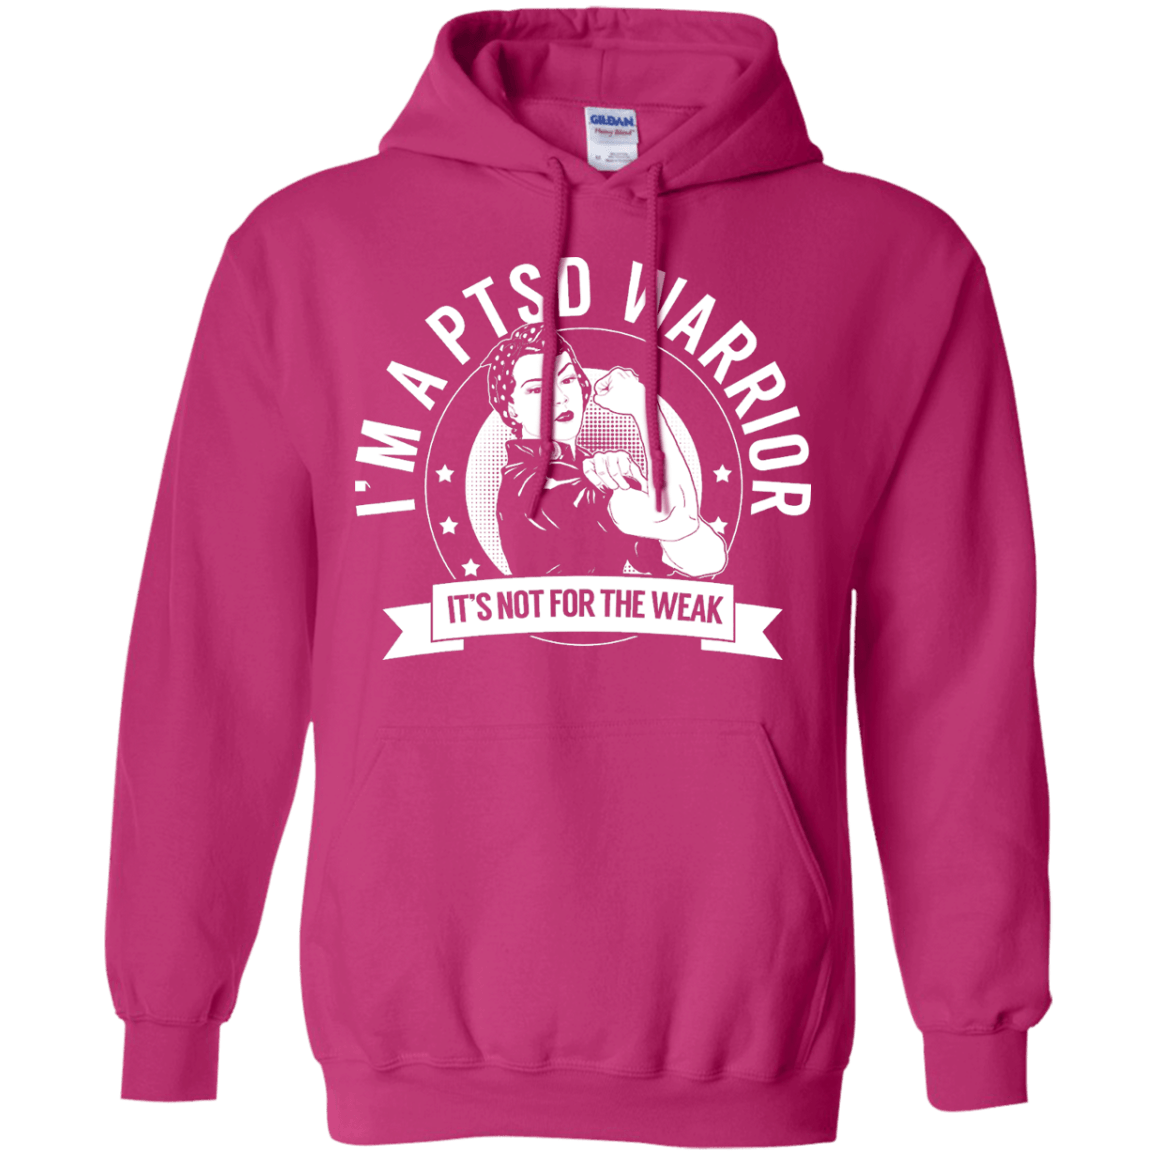 Post Traumatic Stress Disorder - PTSD Warrior Not For The Weak Pullover Hoodie 8 oz - The Unchargeables